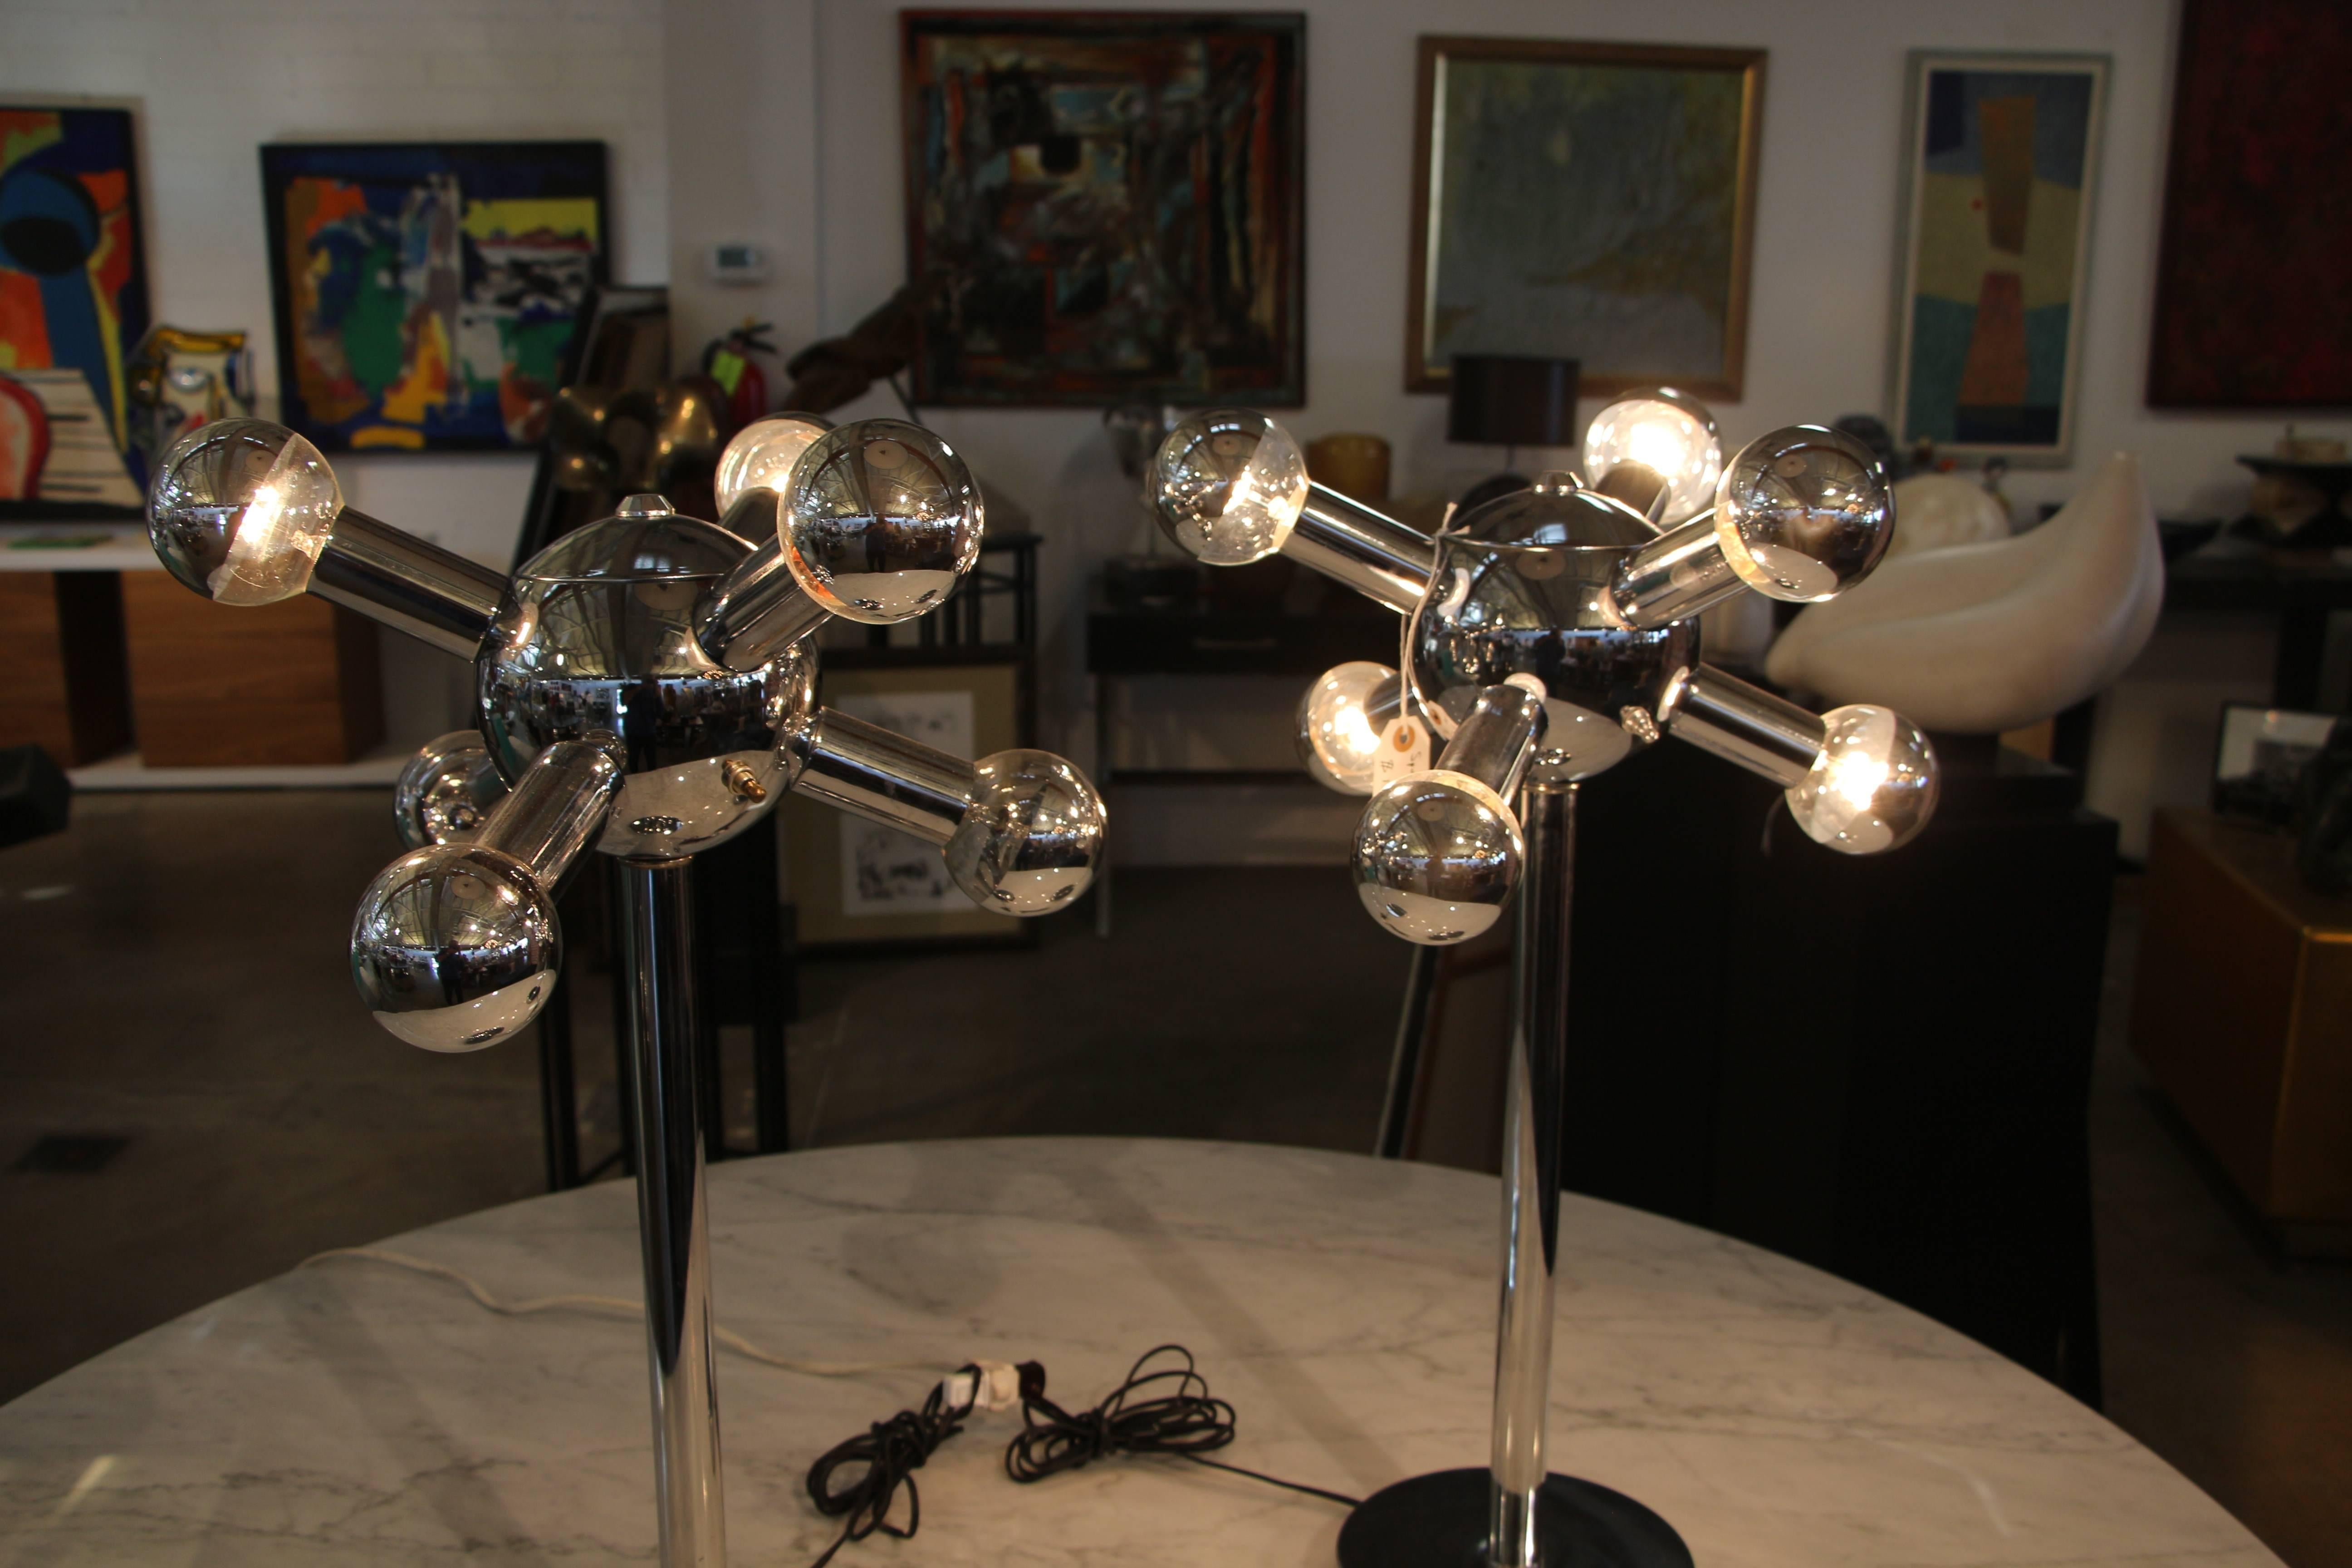 A nice pair of Sonneman Sputnik lamps in working order with three way switches. The lights can be alternated as pictured. Good age appropriate condition with some surface scratches and minor imperfections.